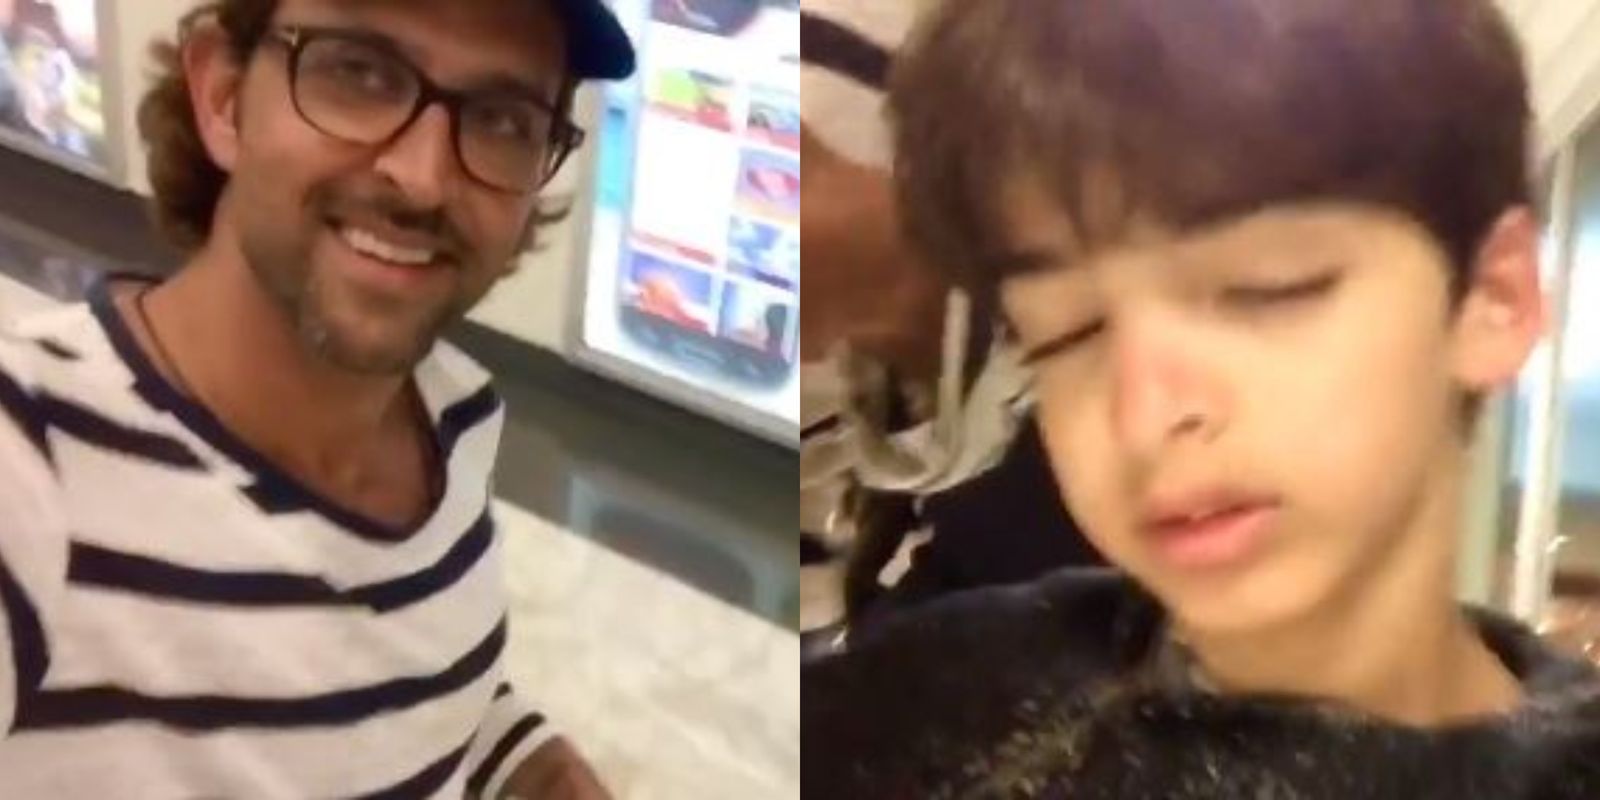 Hrithik Roshan Shares Funny Throwback Video Of Son Hridhaan 'Sleepwalking' Says He 'Learnt The True Meaning Of Multitasking'